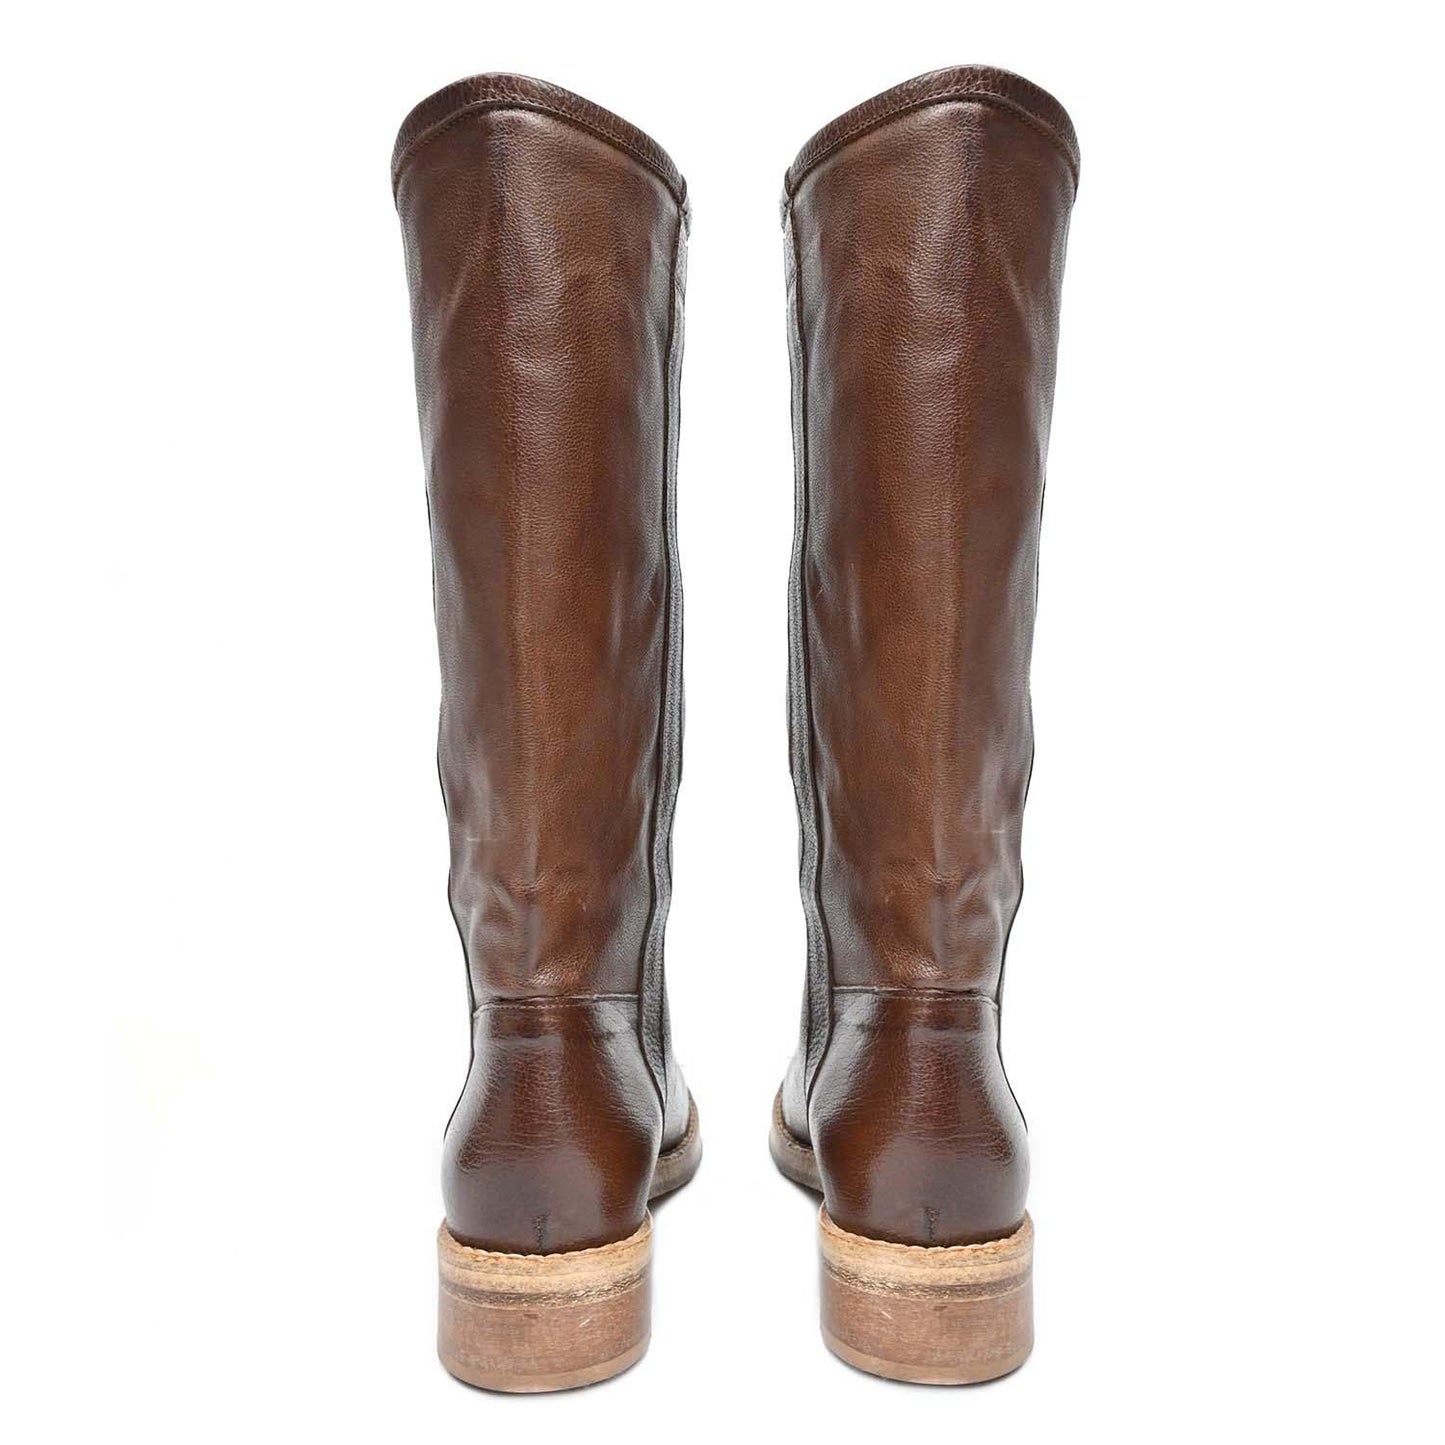 ALEX 02 - Horse Boots Mid Leather TAN - History541